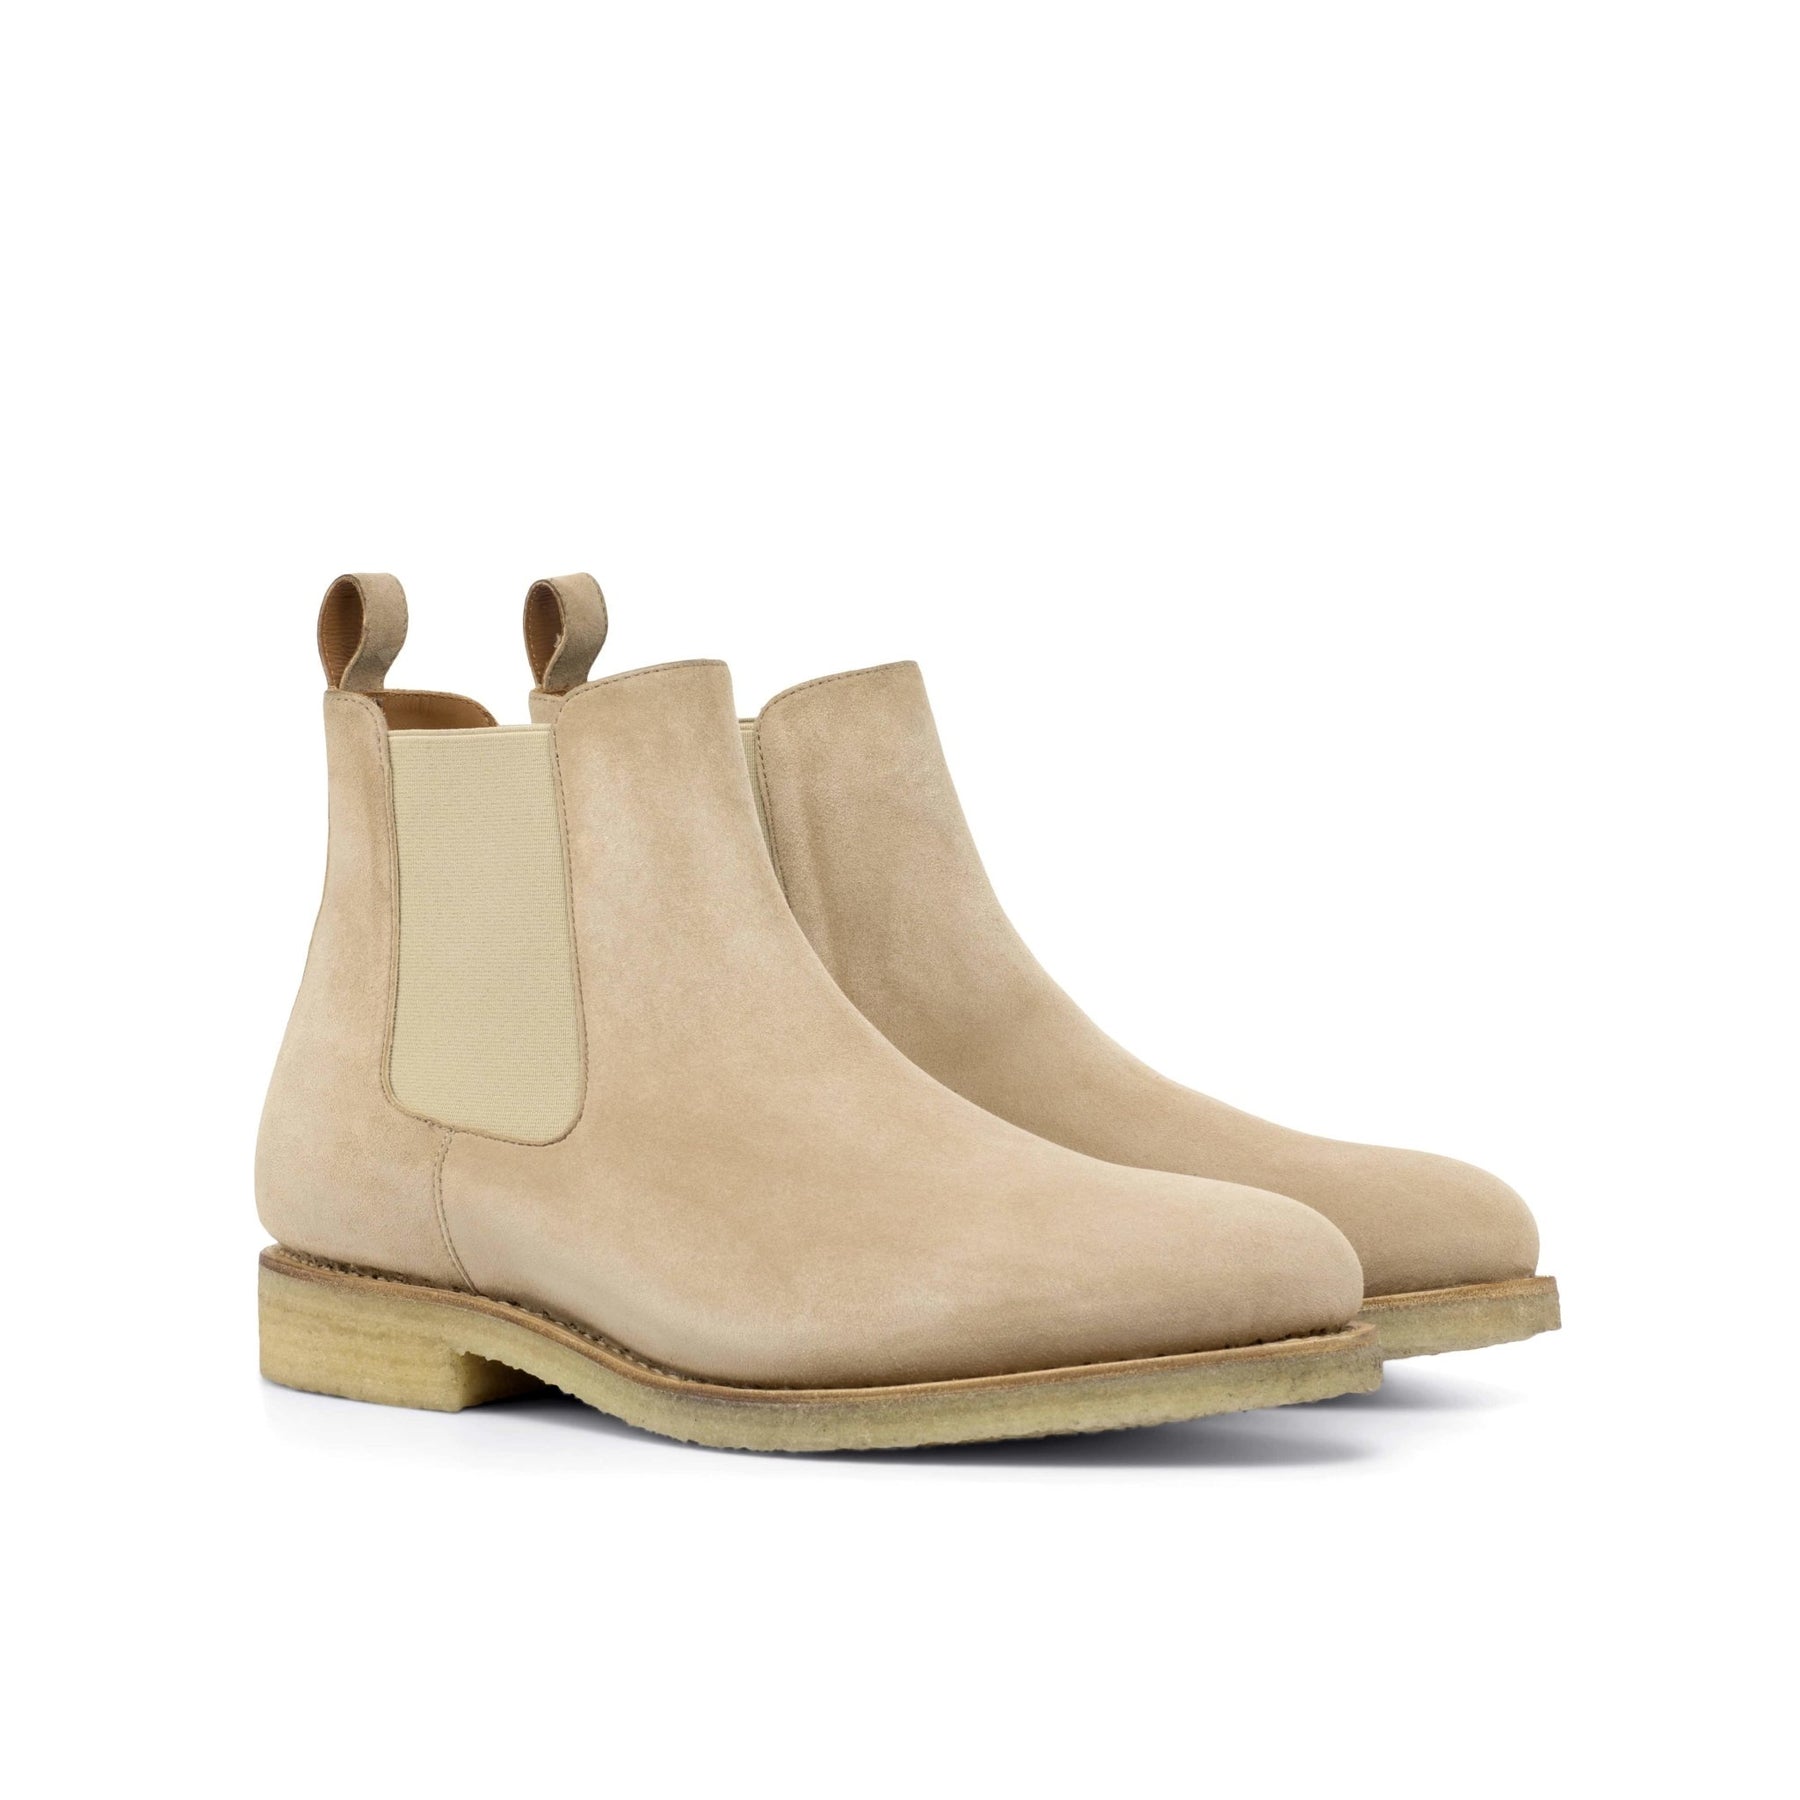 Men's Beige Suede Boots with Crepe Sole Maison Kingsley Couture